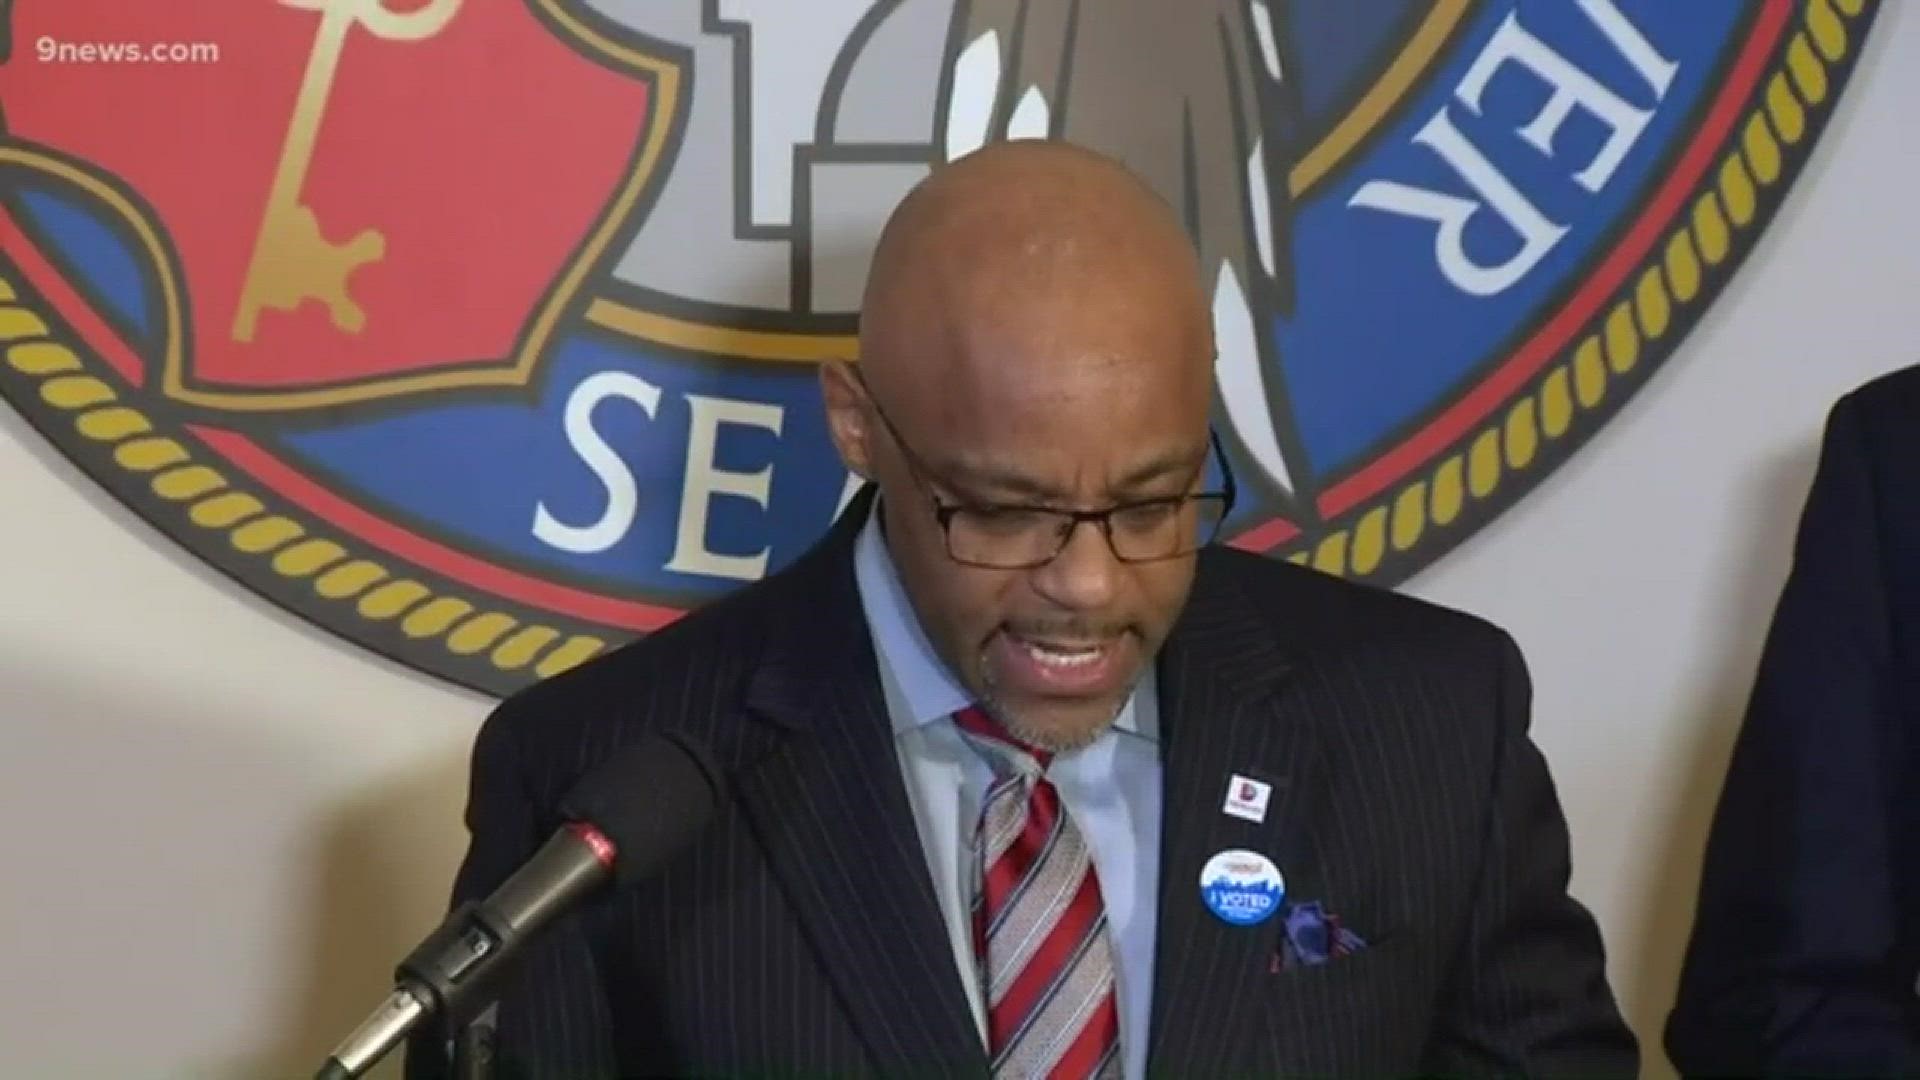 Mayor Michael Hancock gave an update on city efforts to prepare for a potential coronavirus outbreak in Denver.